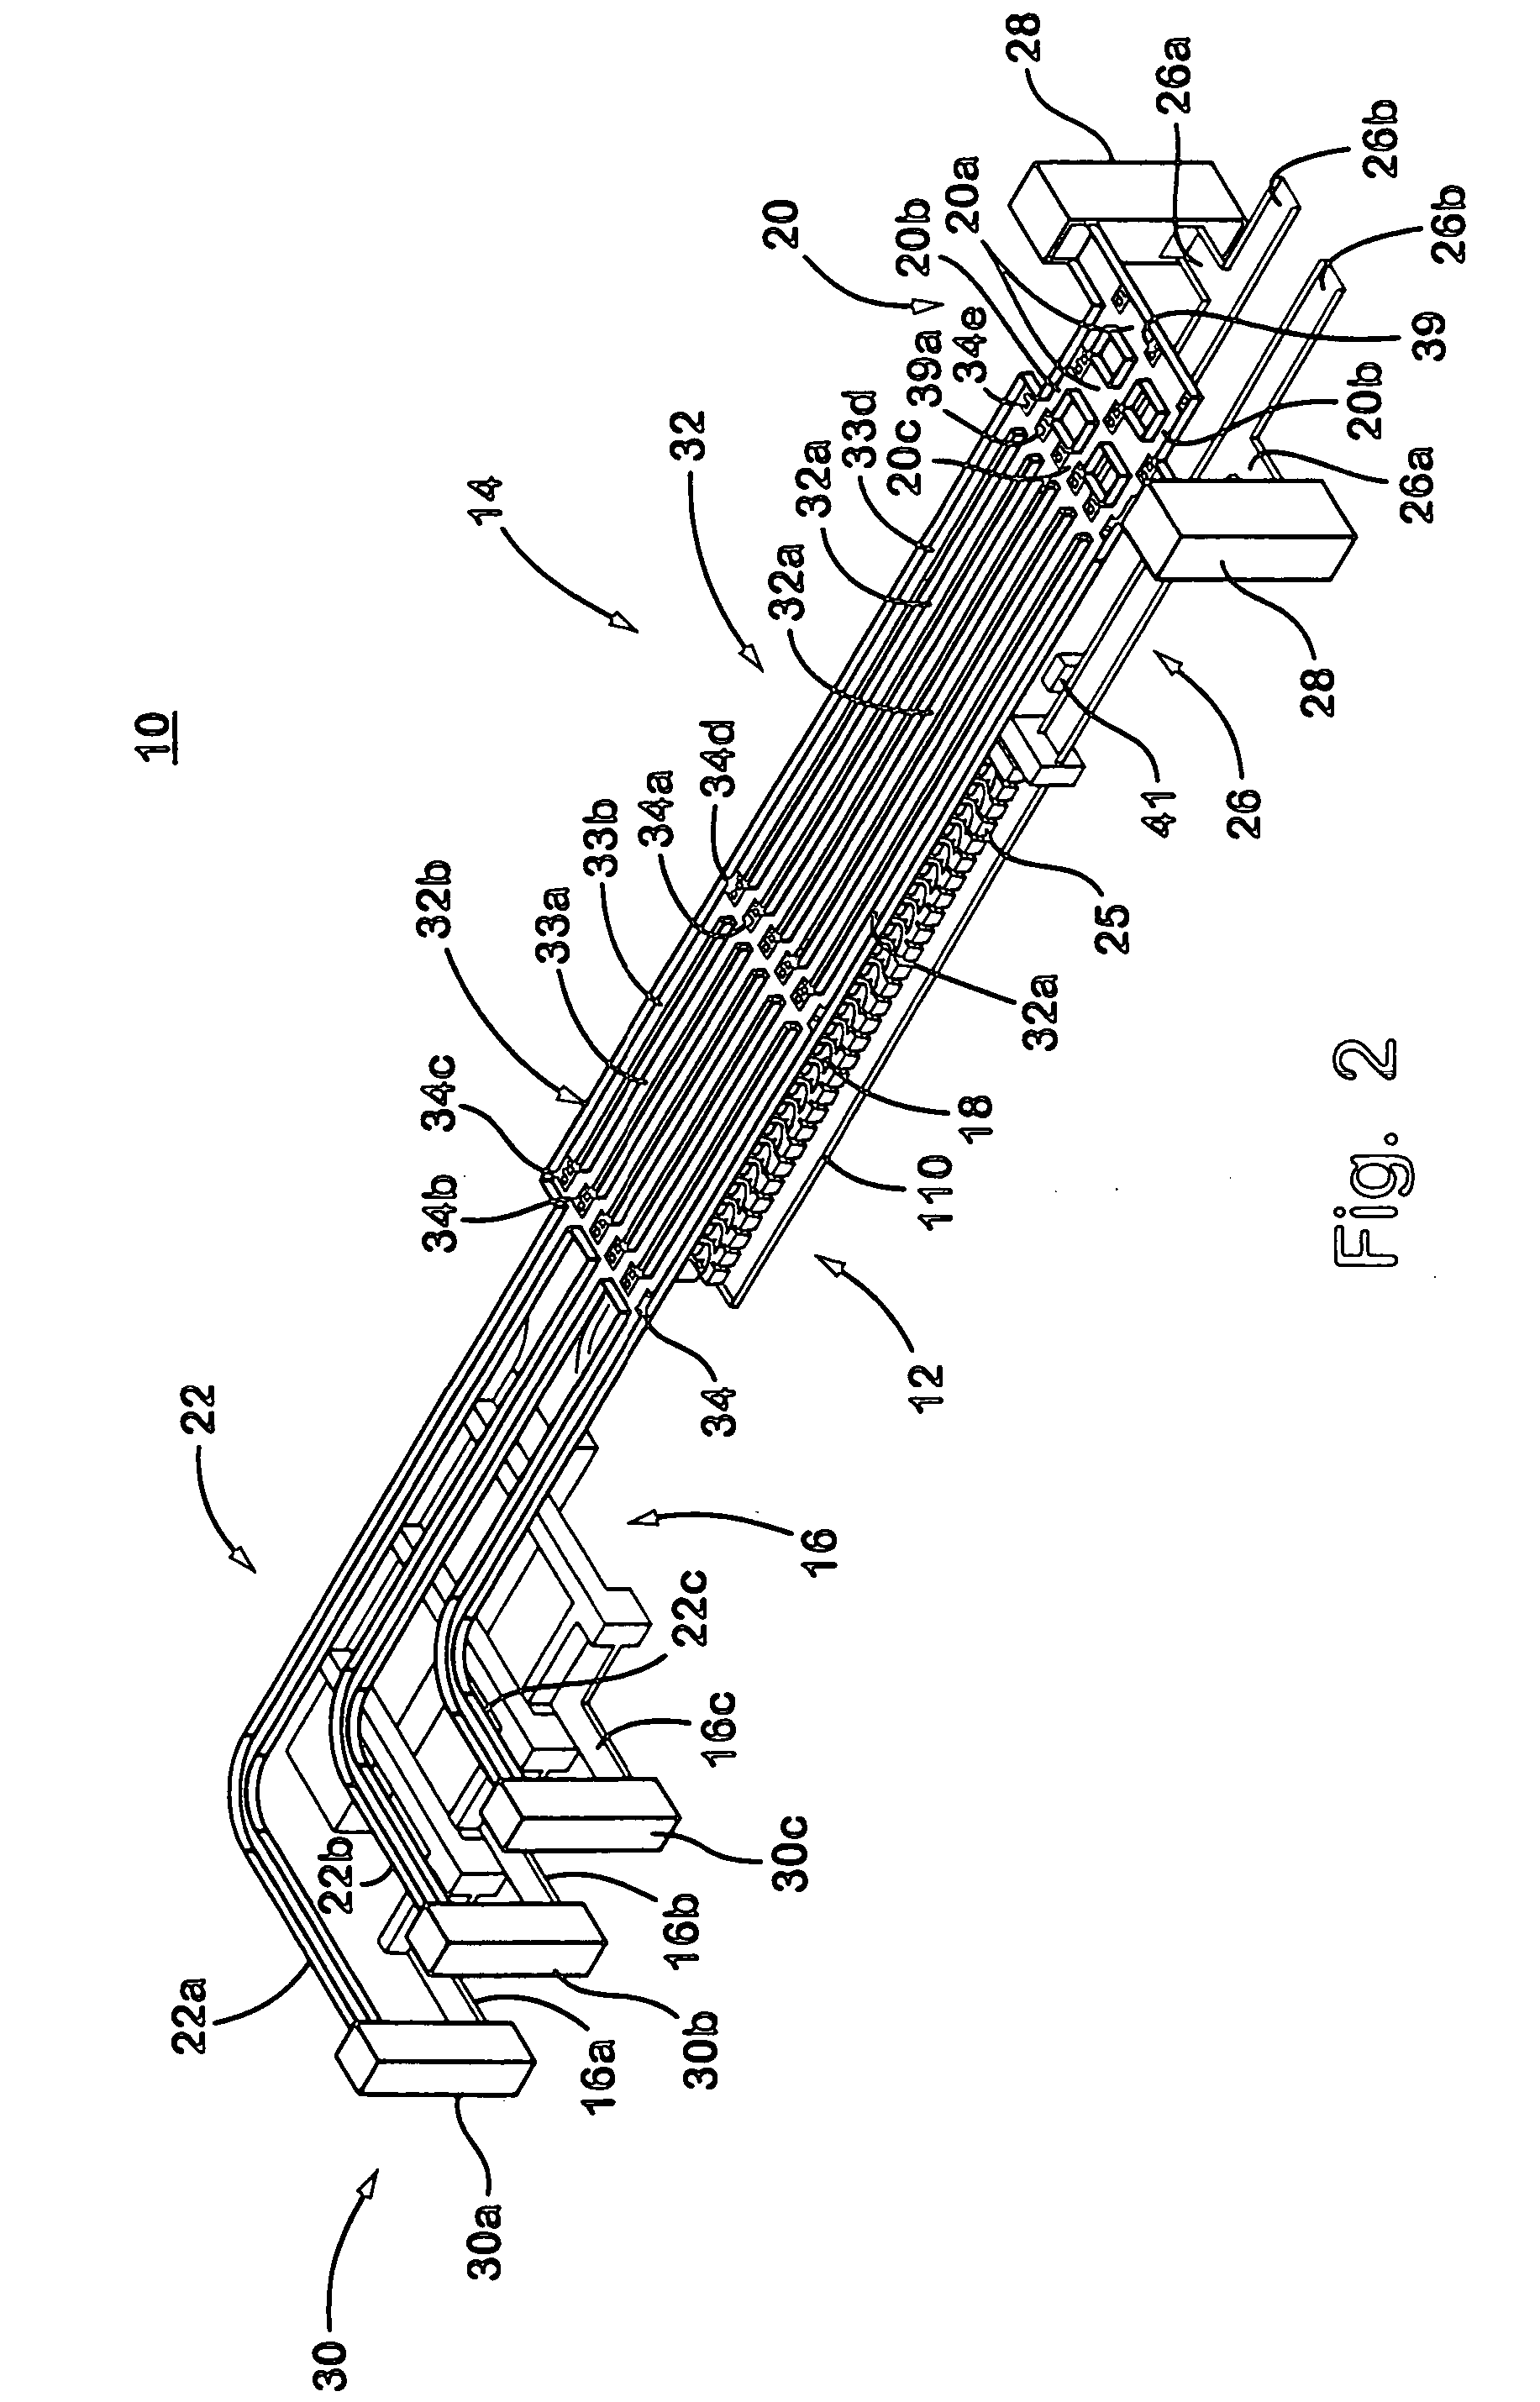 Delivery point sequencing mail sorting system with flat mail capability